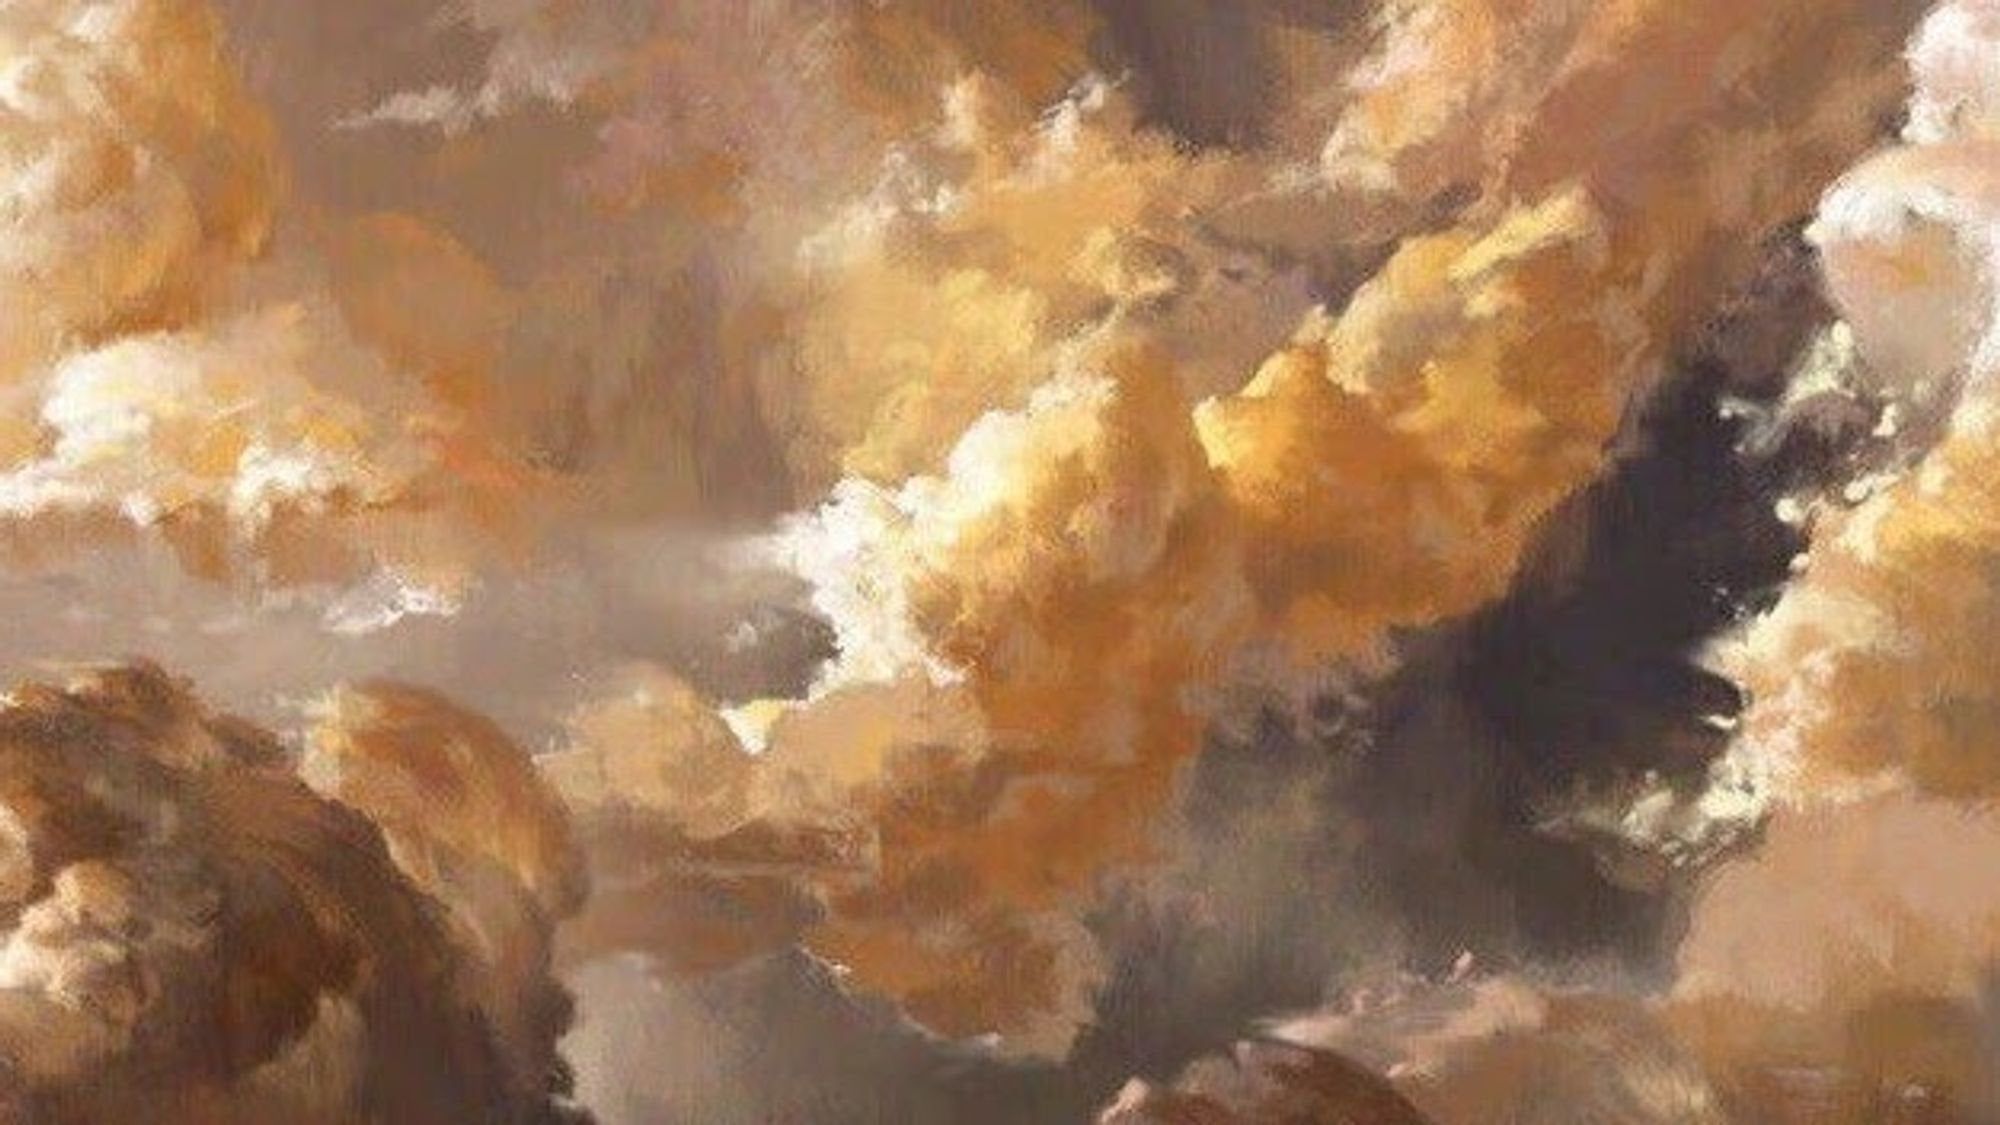 A painting of clouds in the sky - Light academia